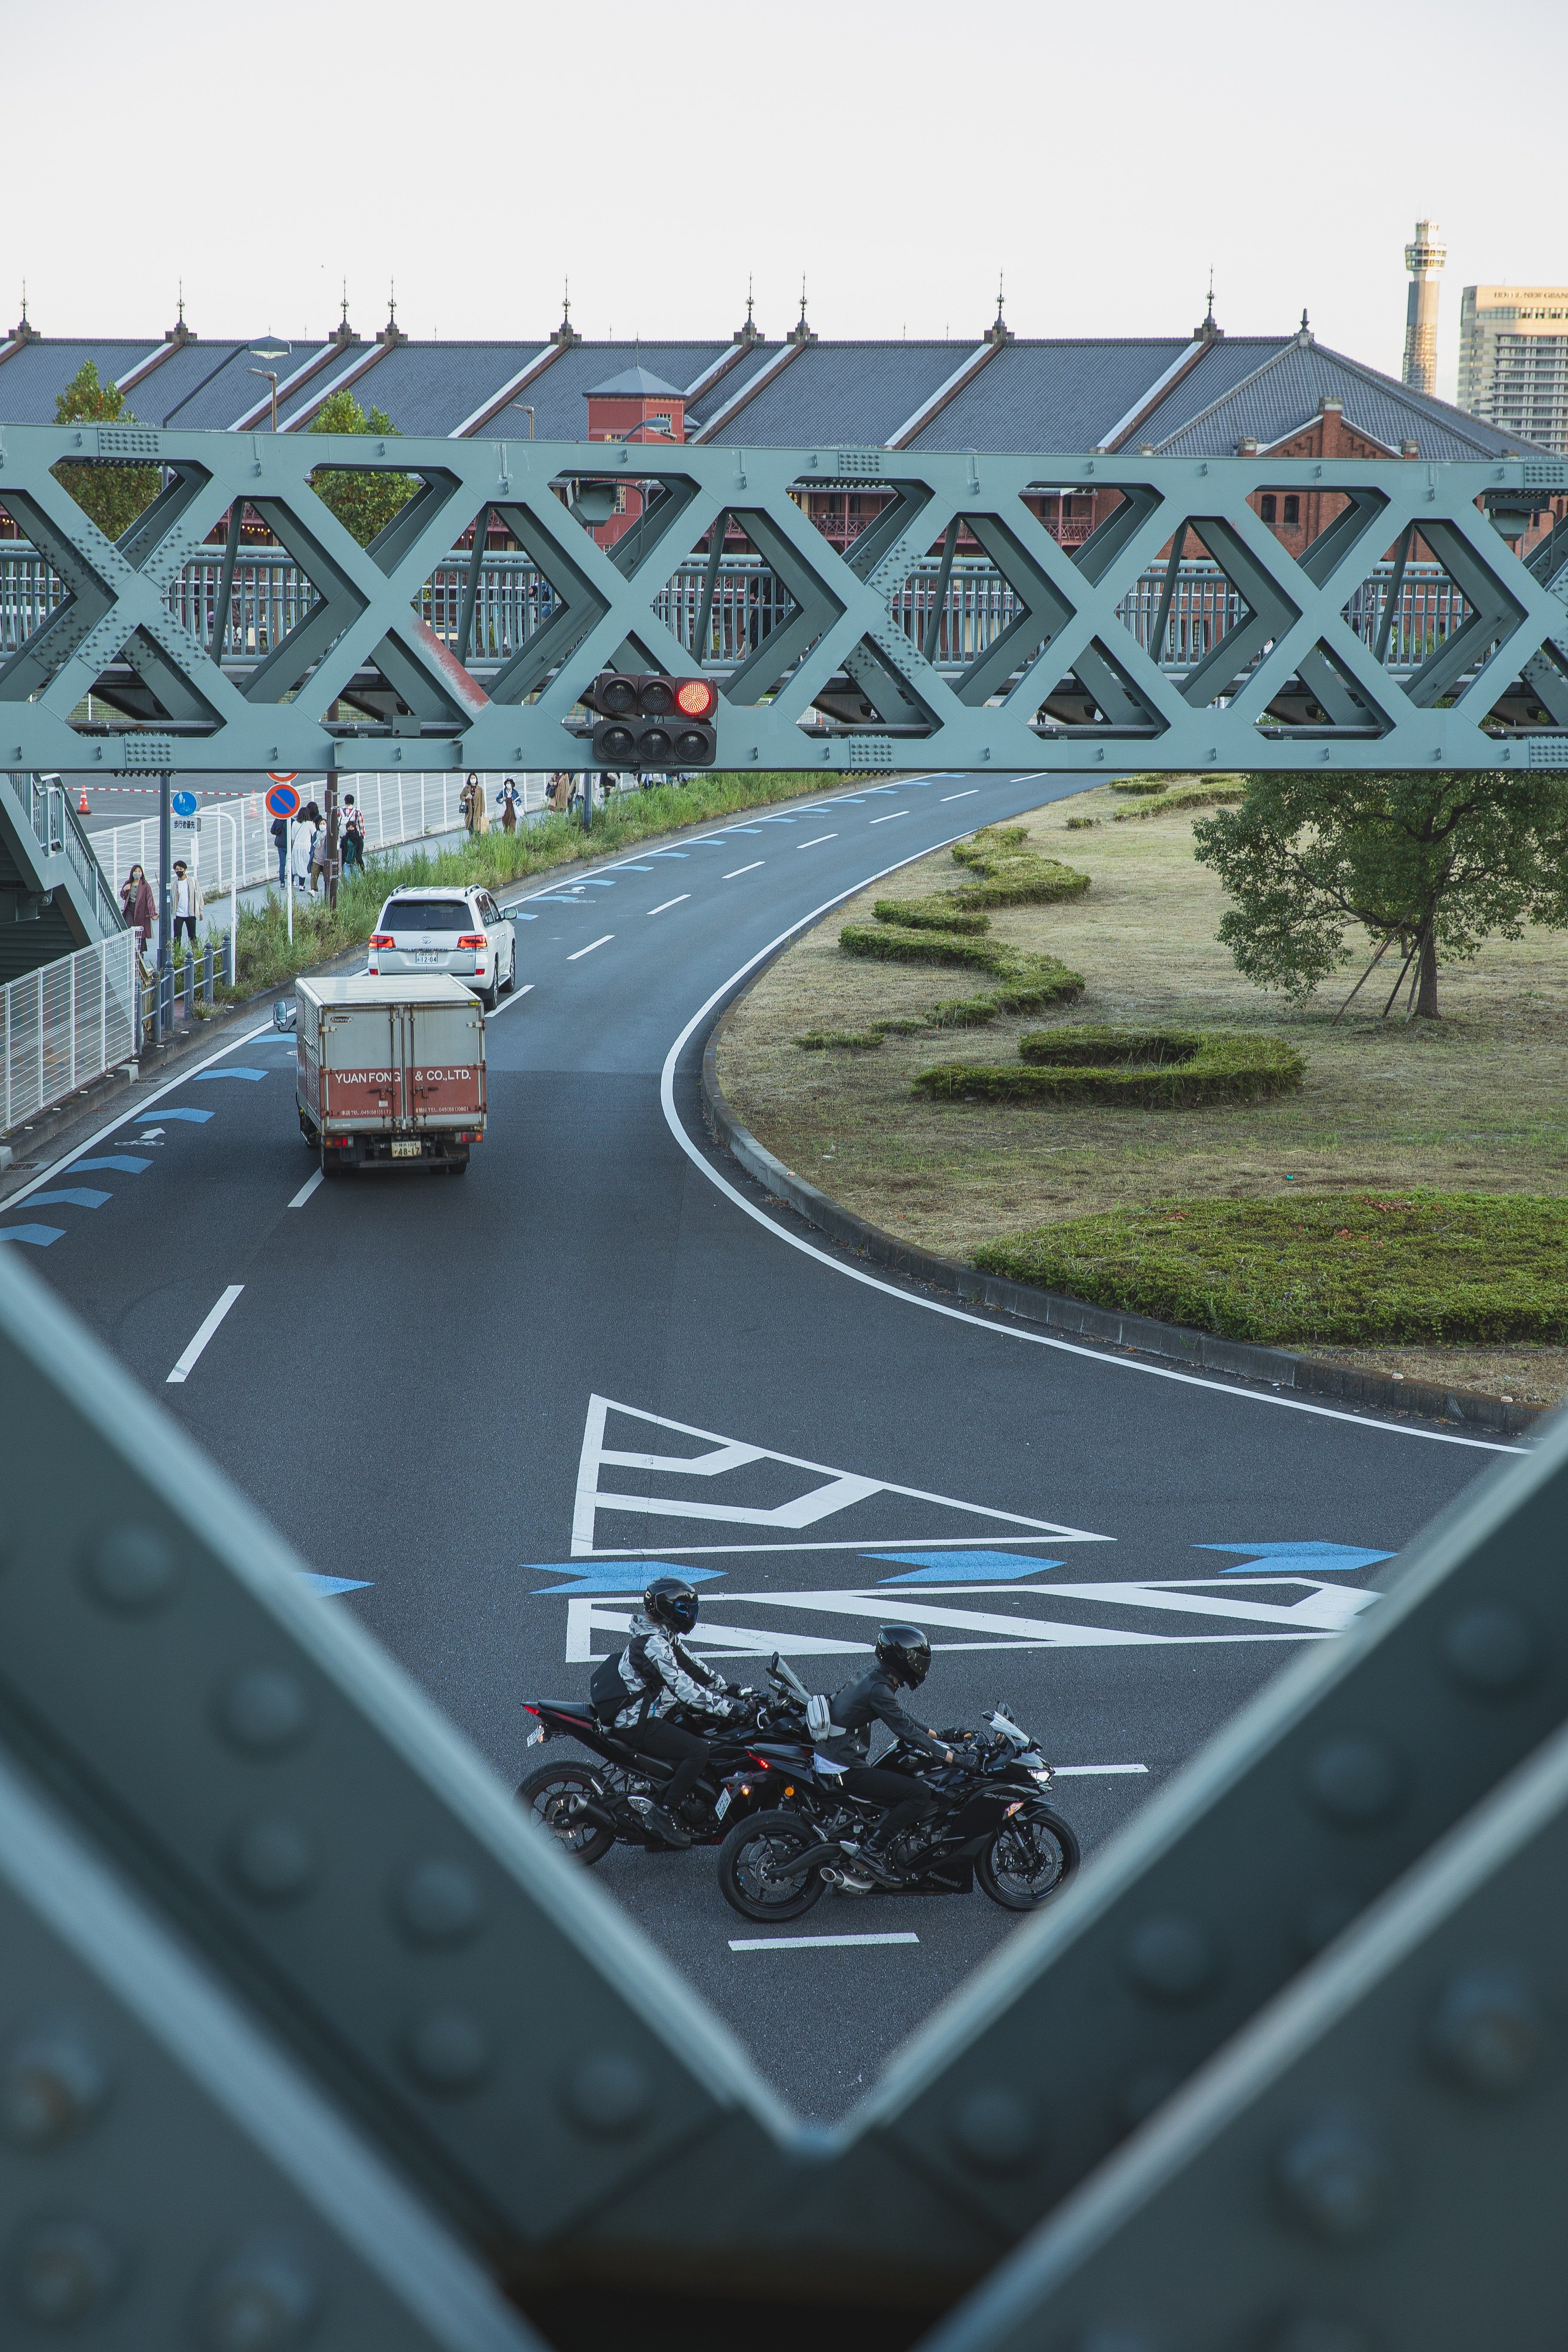 Pictured - An image of vehicles and motorcycles on an urban road under a pedestrian bridge | Source: Pexels 